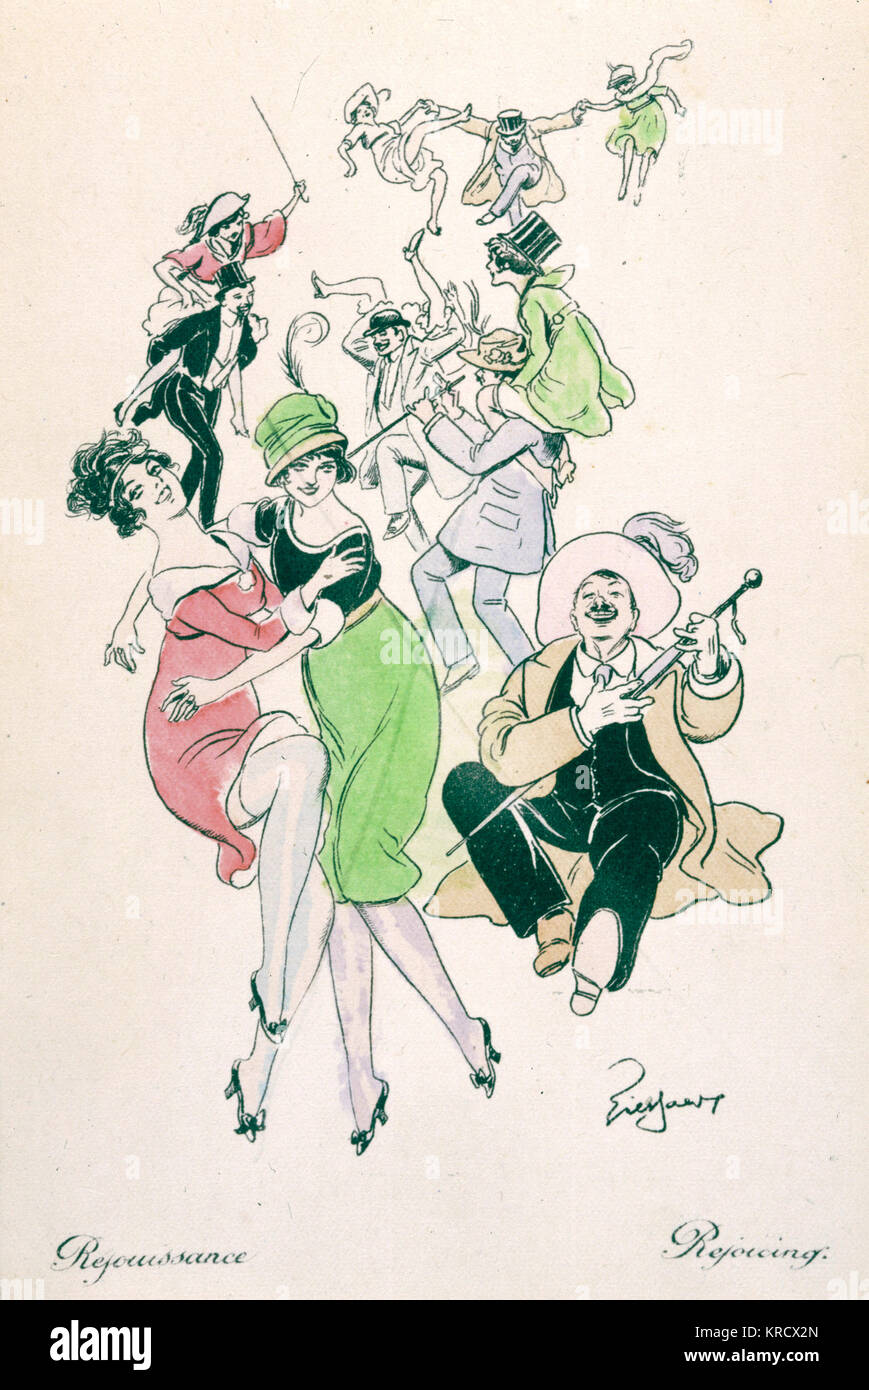 Men and women doing a lively dance - Rejoicing! Date: 1920s Stock Photo